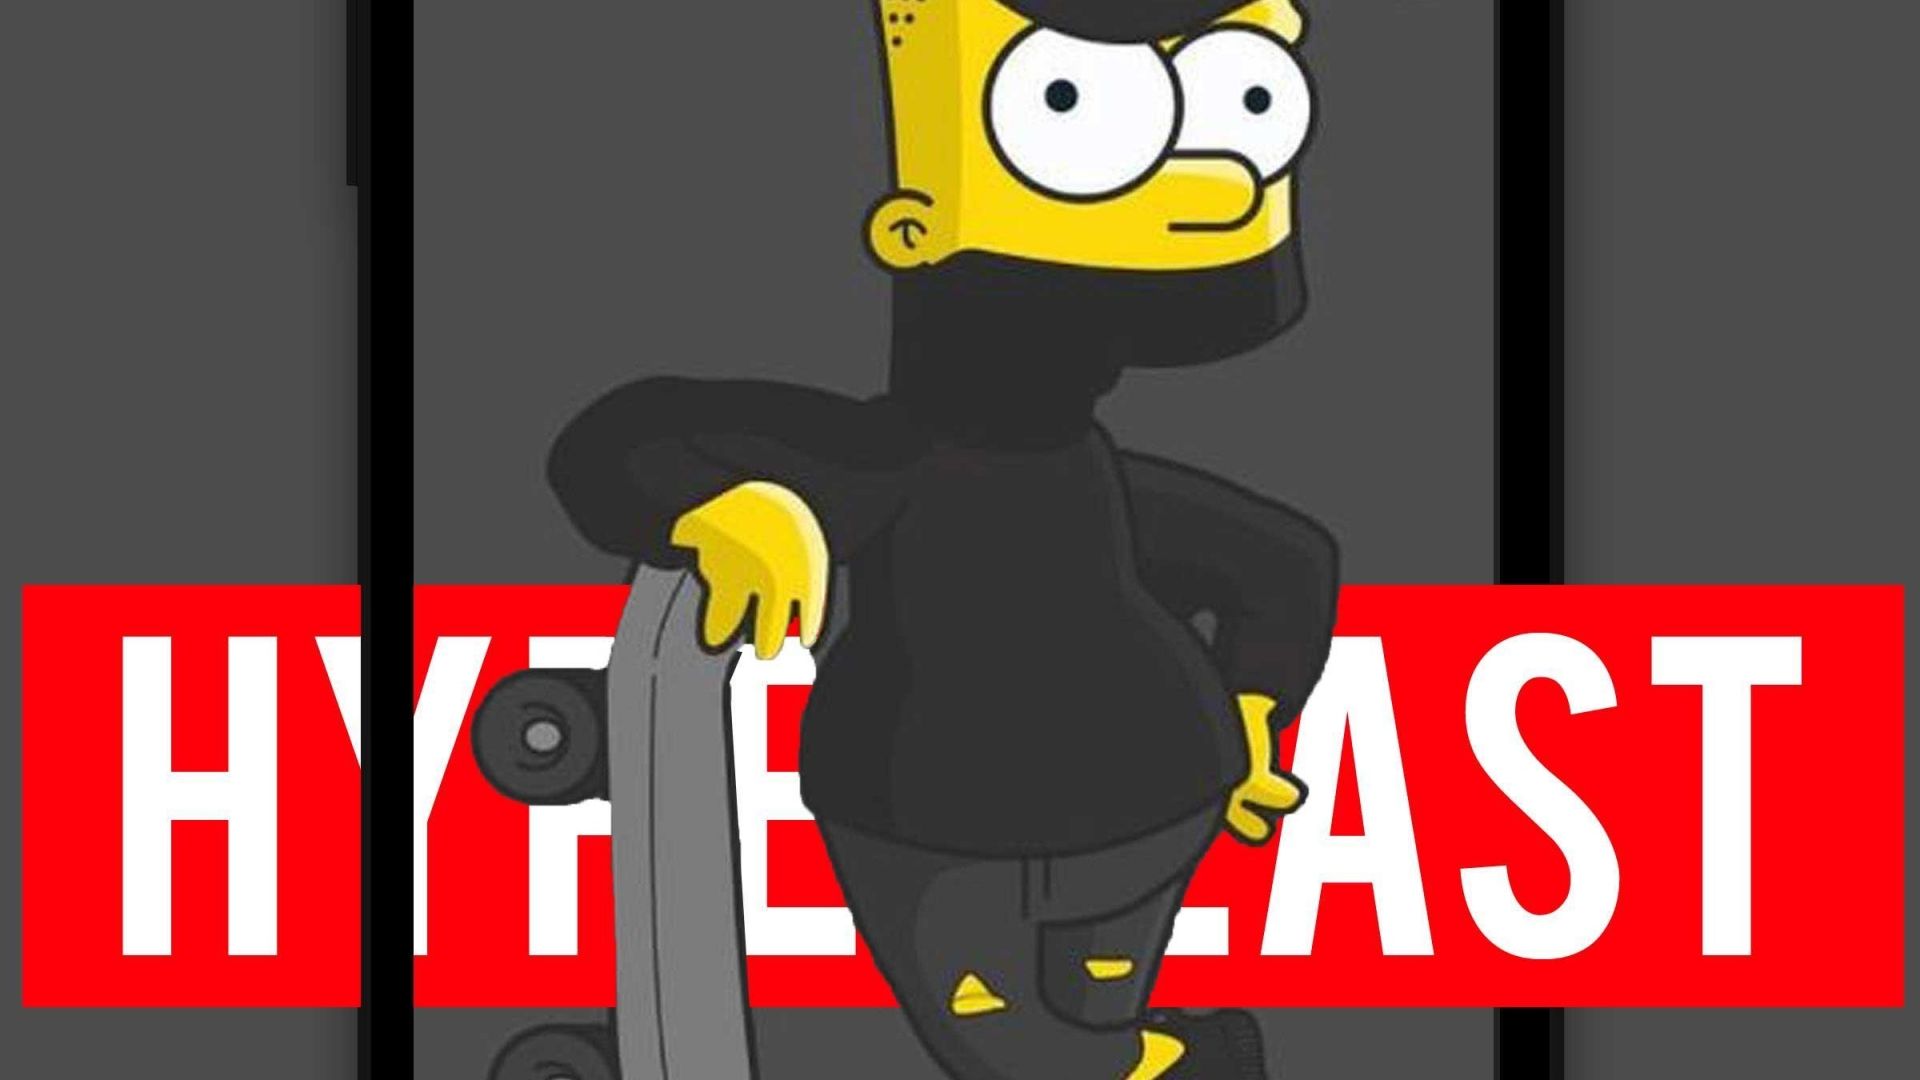 Free download Bart Hypebeast Wallpaper HD for Android APK